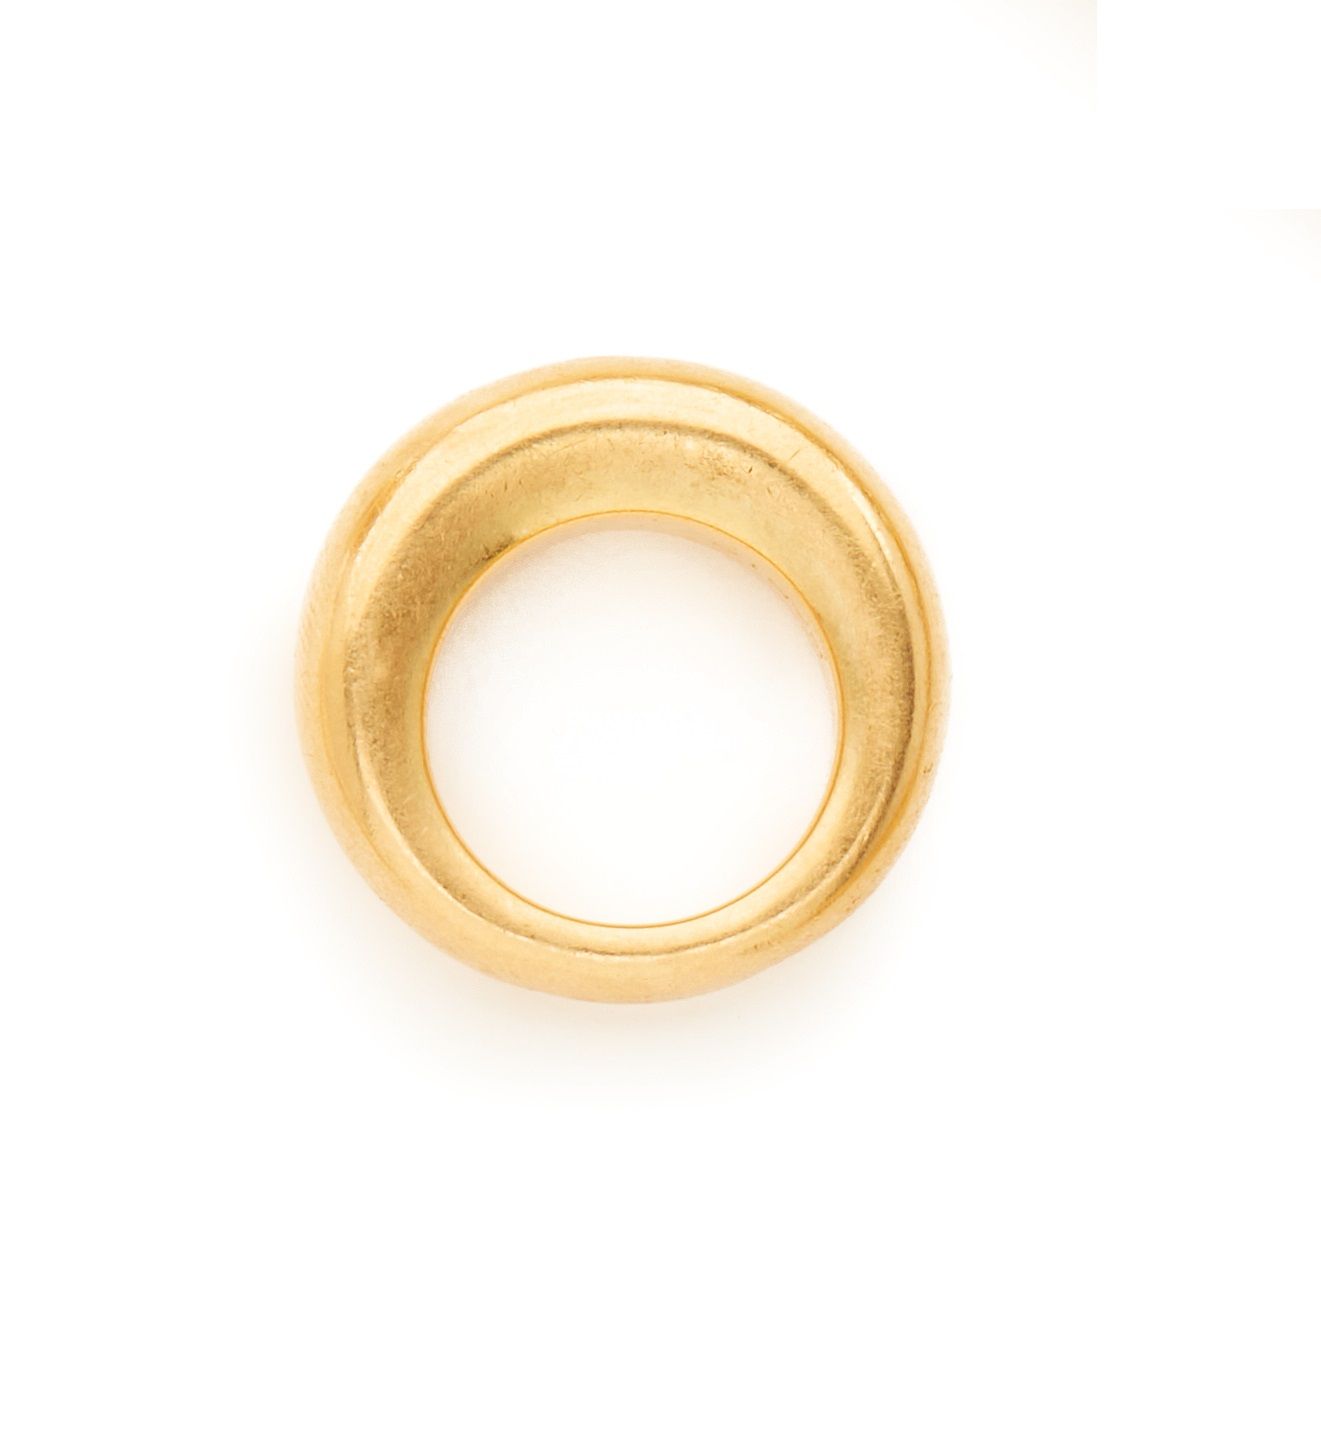 Null CHAUMET 
Ring "L'anneau" model in 18K yellow gold 750/000
Signed and number&hellip;